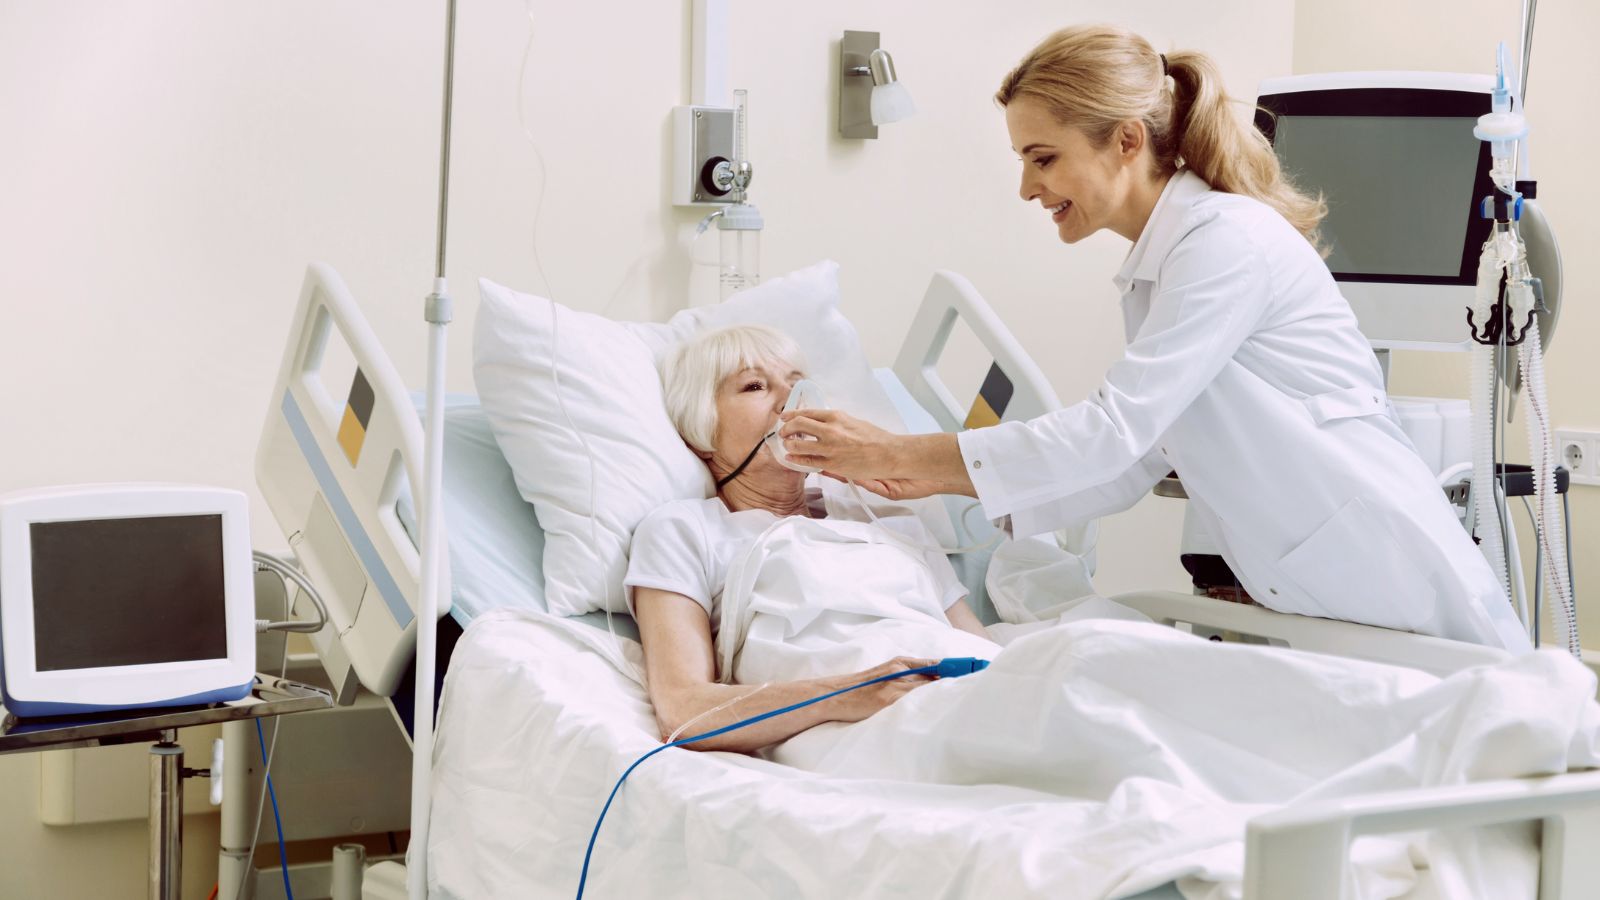 <p>To become a respiratory therapist, you only need an associate’s degree in respiratory therapy. It’s a shorter and much less expensive career path compared to a four-year college degree. A respiratory therapist is considered to have a critical role in healthcare, and it’s a position that’s seen substantial growth.</p>